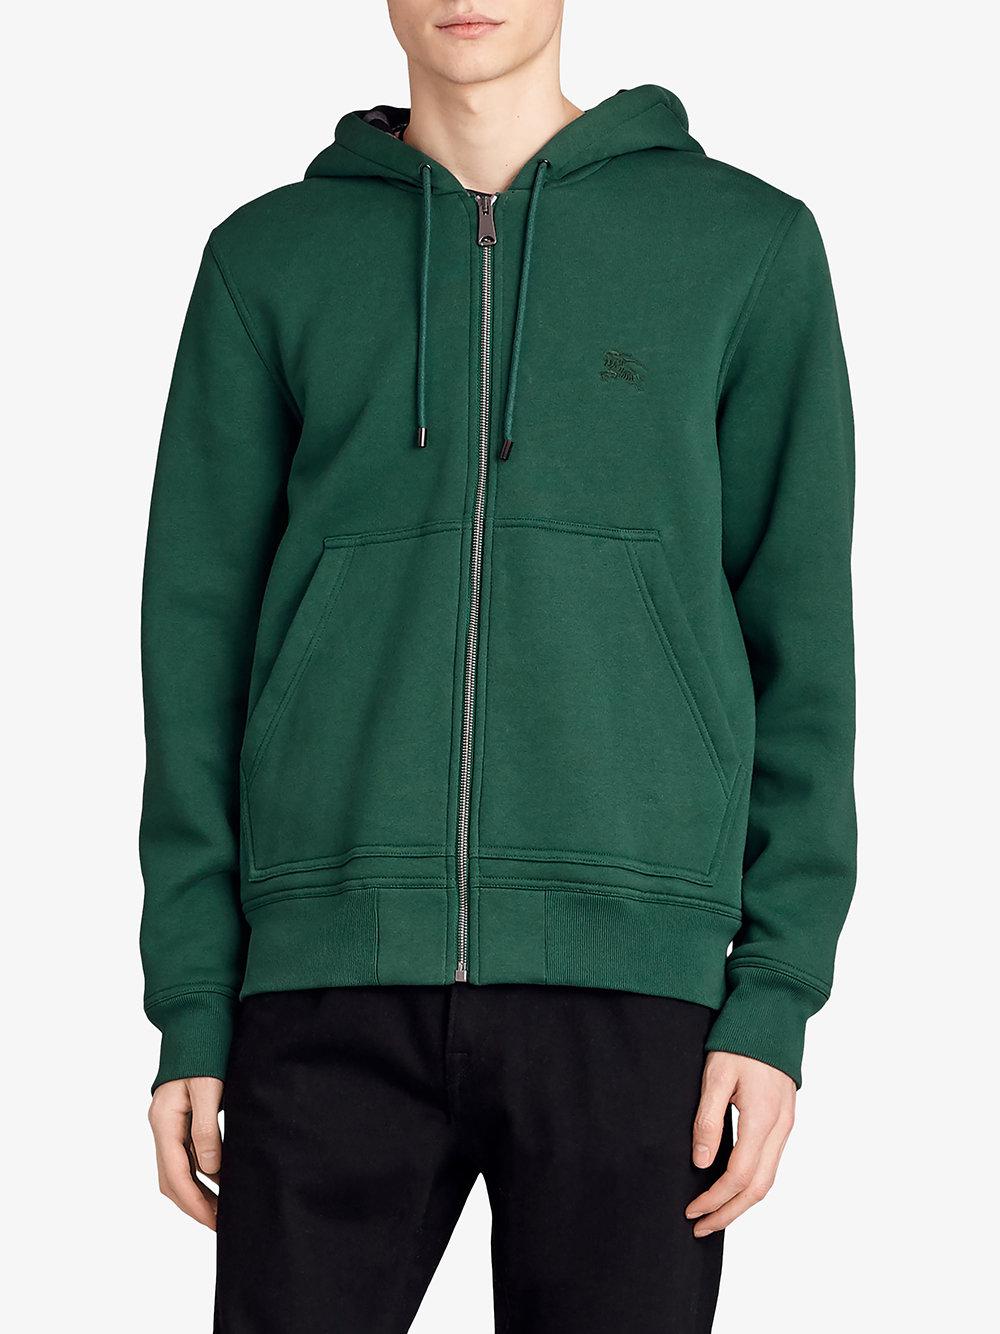 Burberry Check Detail Hooded Sweatshirt in Green for Men | Lyst